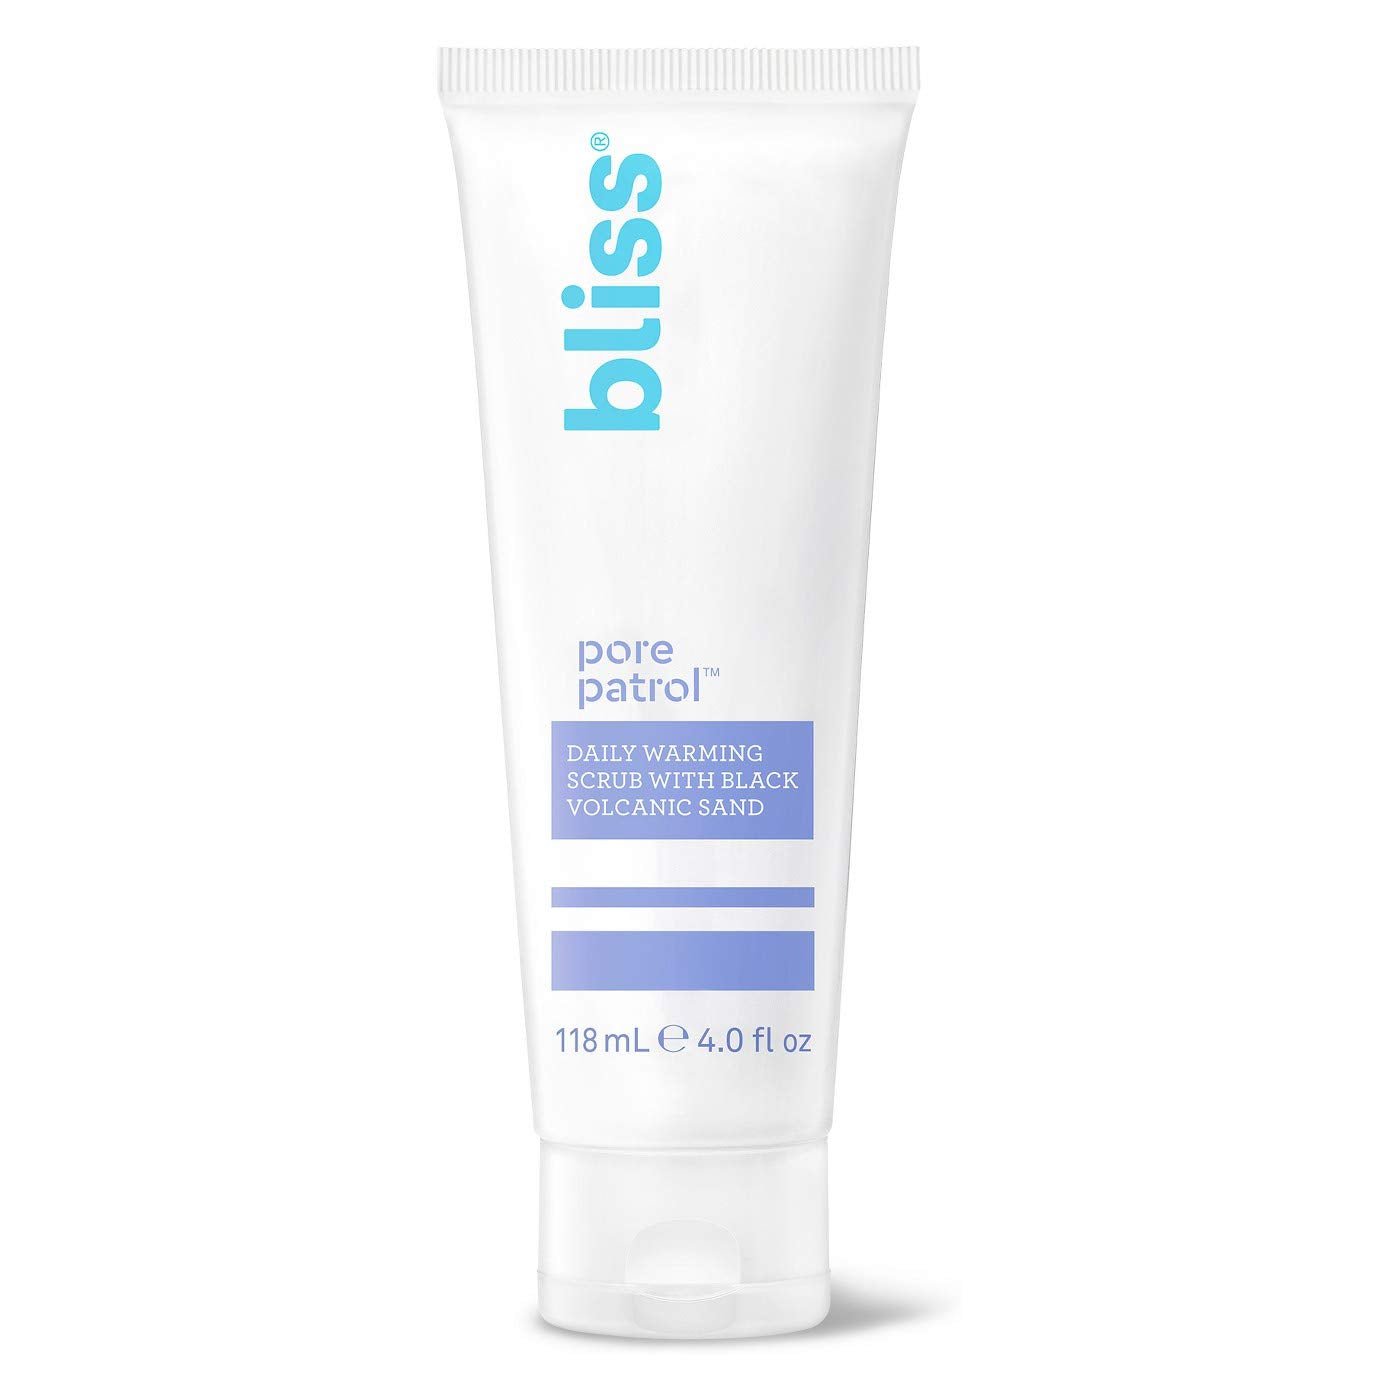 Bliss Pore Patrol Warming Daily Purifying Scrub - 4.0 Fl Oz - Oil-Free Exfoliating Scrub - Safe for Sensitive Skin- Visibly Minimizes Pores - Clean- Vegan & Cruelty-Free : Beauty & Personal Care